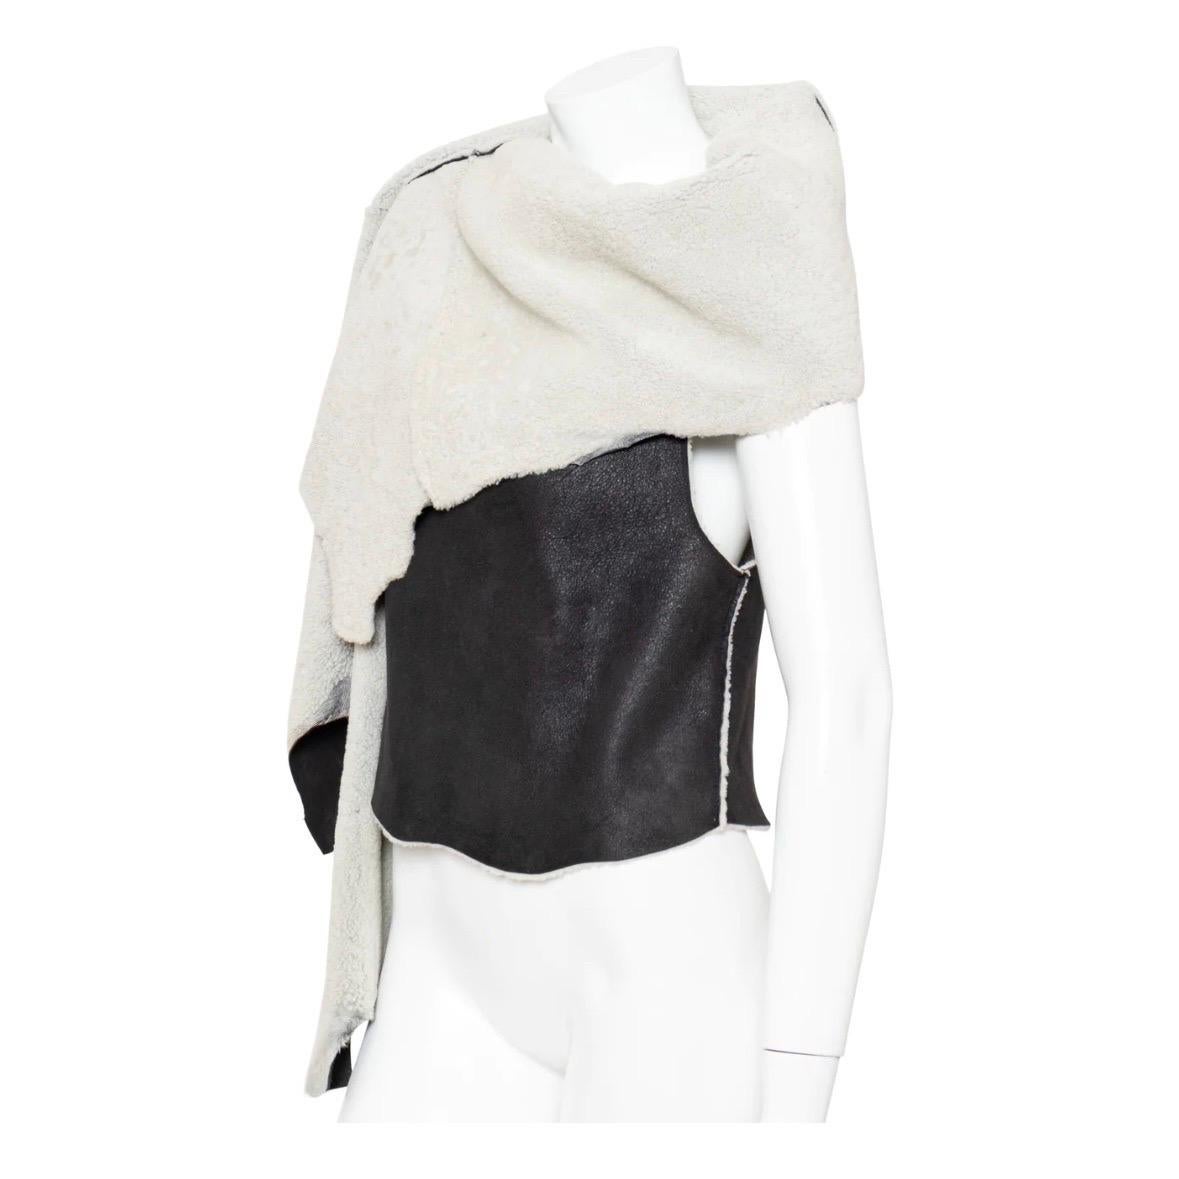 Ann Demeulemeester Shearling Black Wrap In Good Condition For Sale In Los Angeles, CA